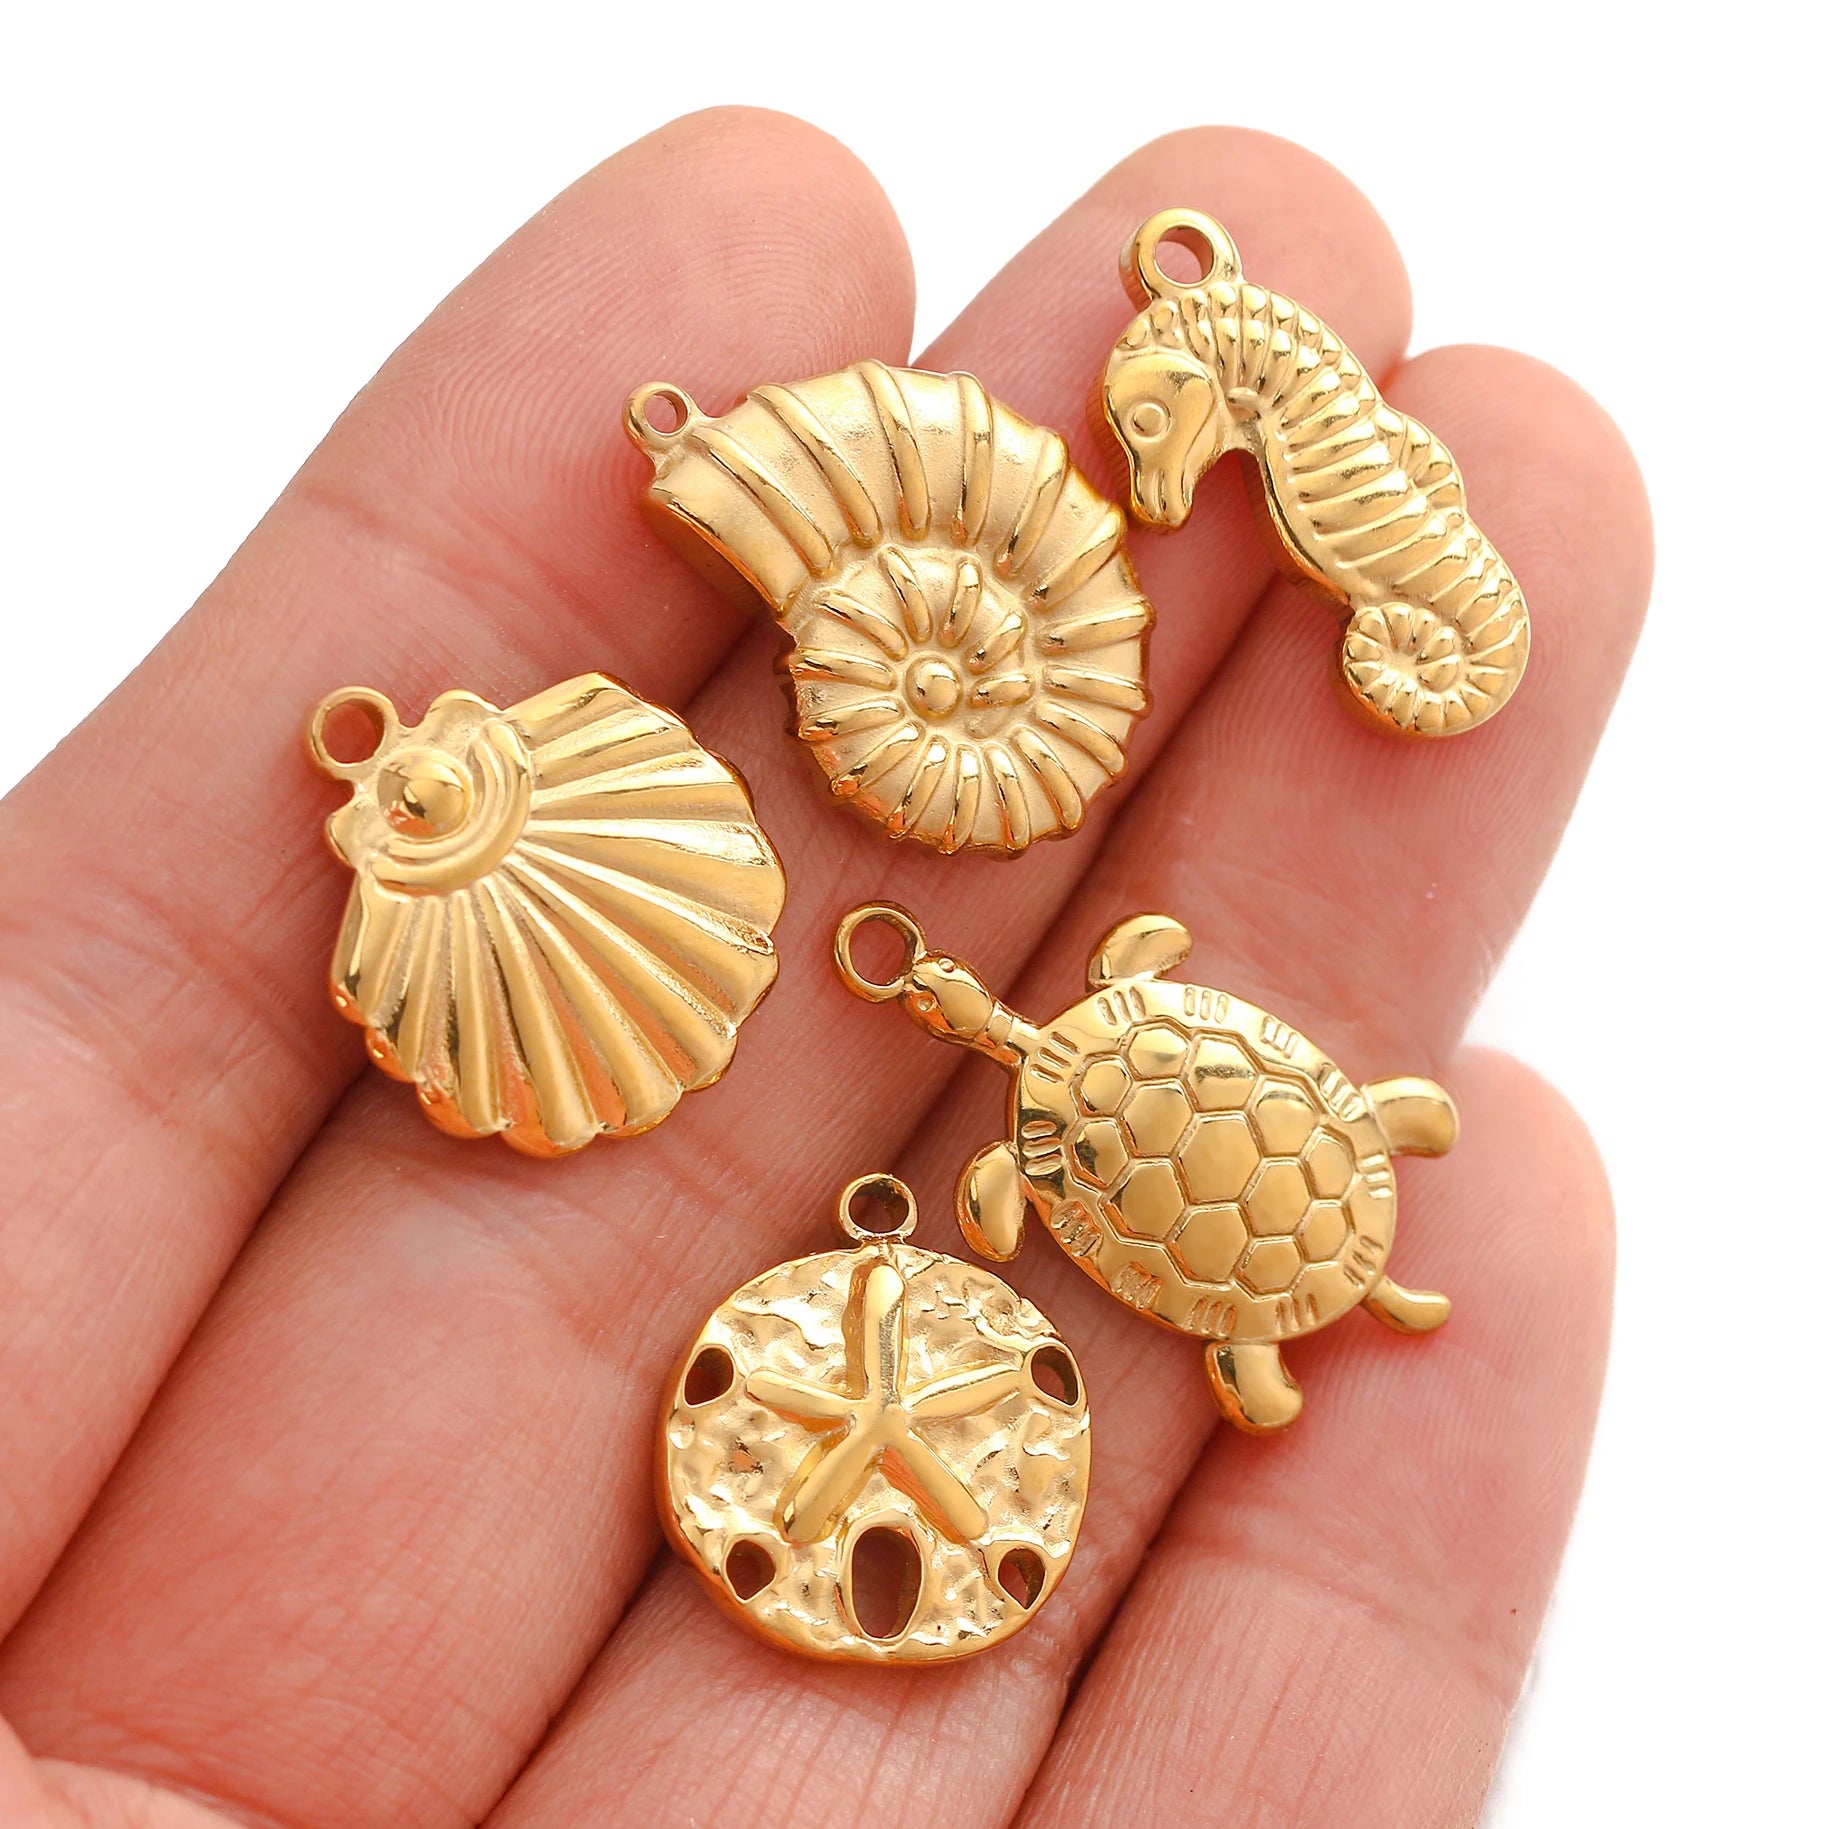 Ocean Life Shell / Turtle / Conch / Starfish / Fish Tail Pendants For DIY Earrings, Necklaces or Bracelets - Madeinsea©